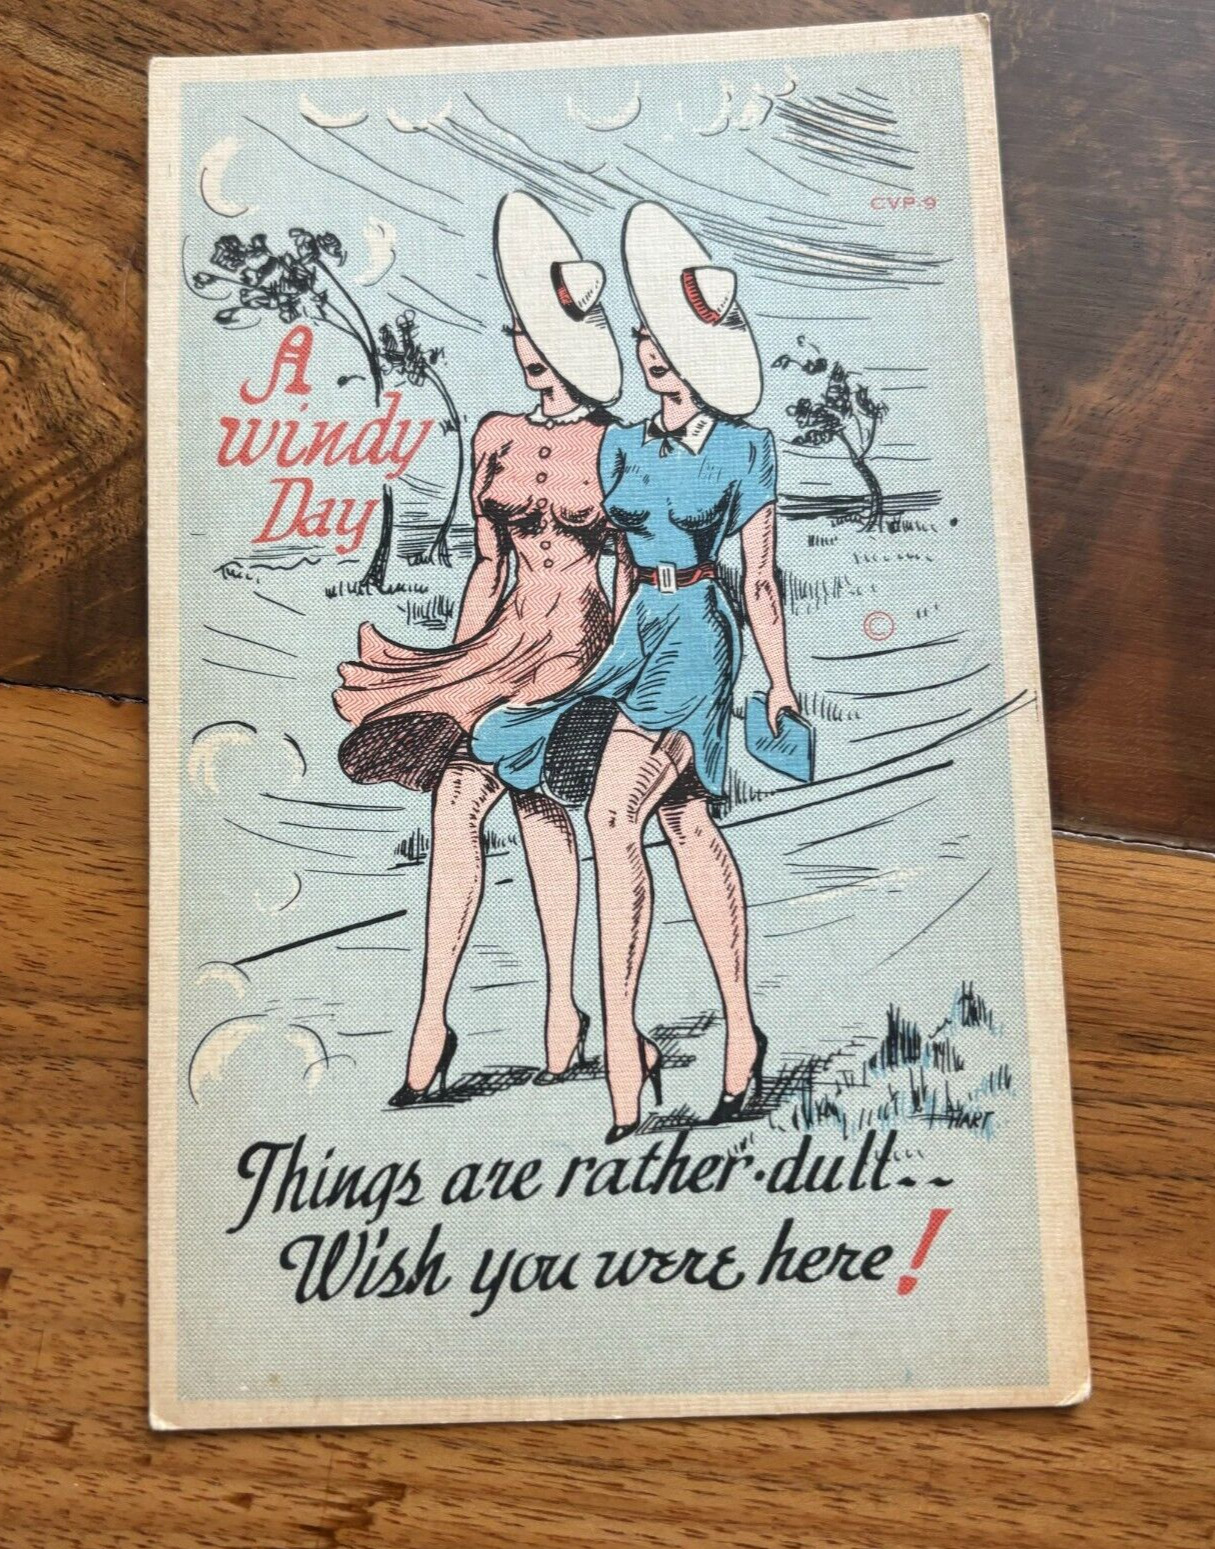 Vintage Postcard A Windy Day Things Are Rather Dull Wish You Were Here CVP-9